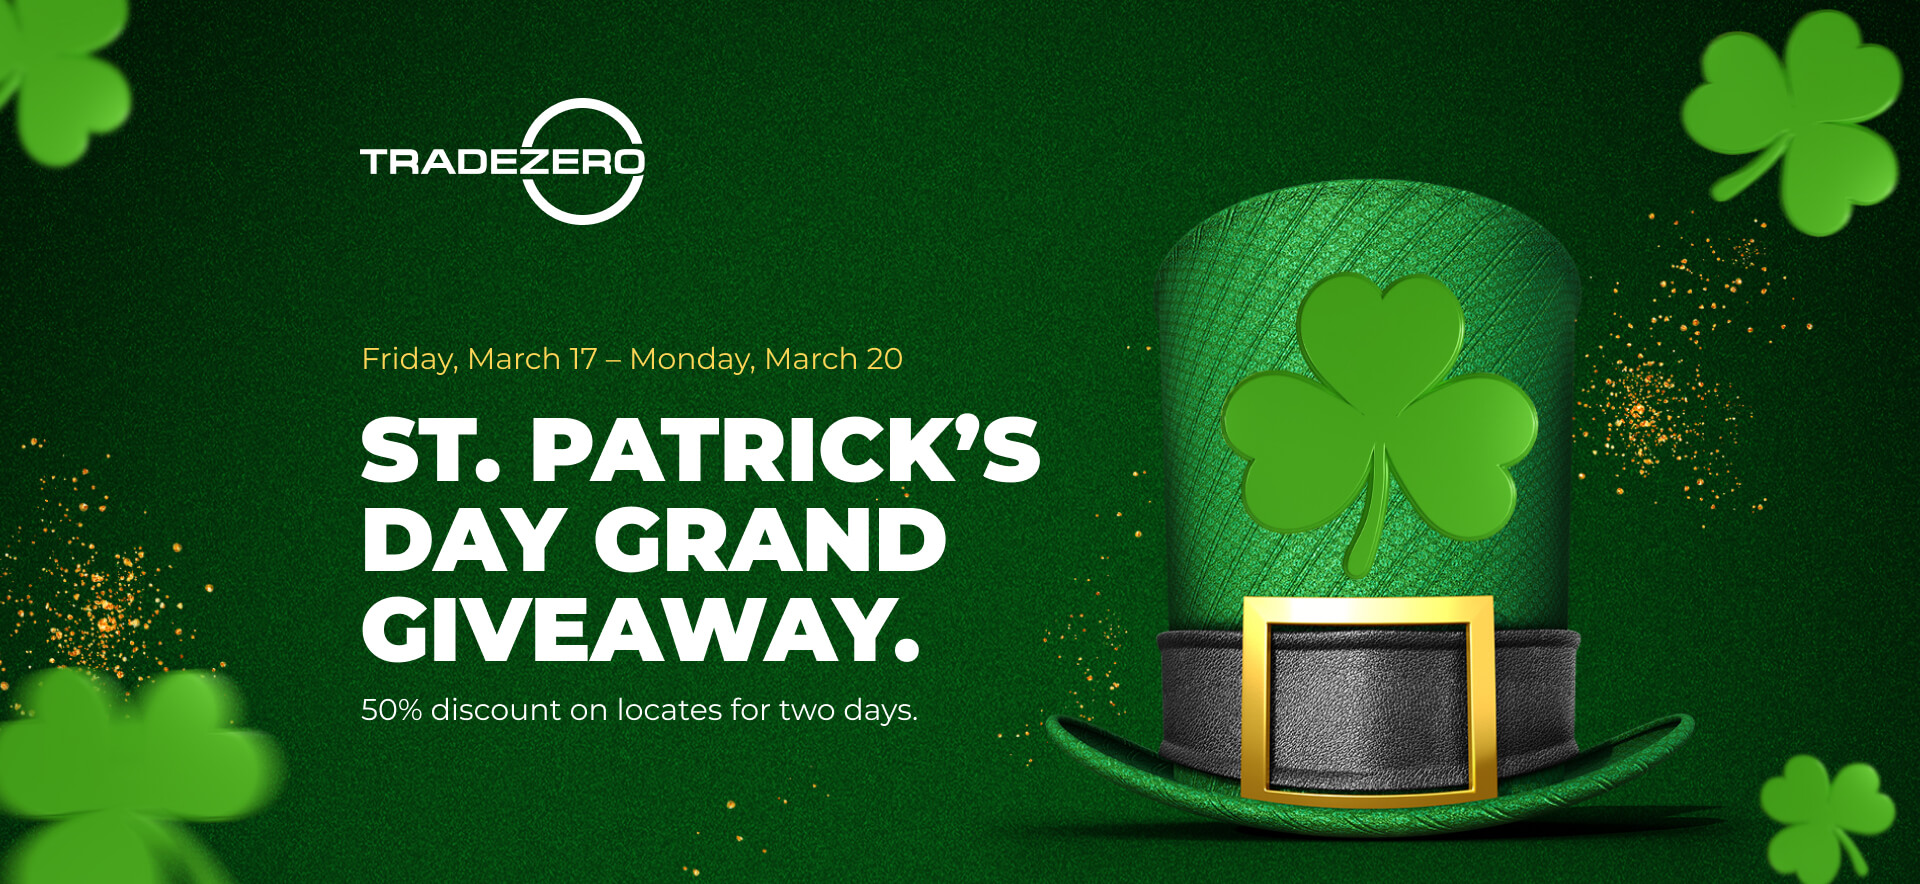 St. Patrick's Day Grand Giveaway